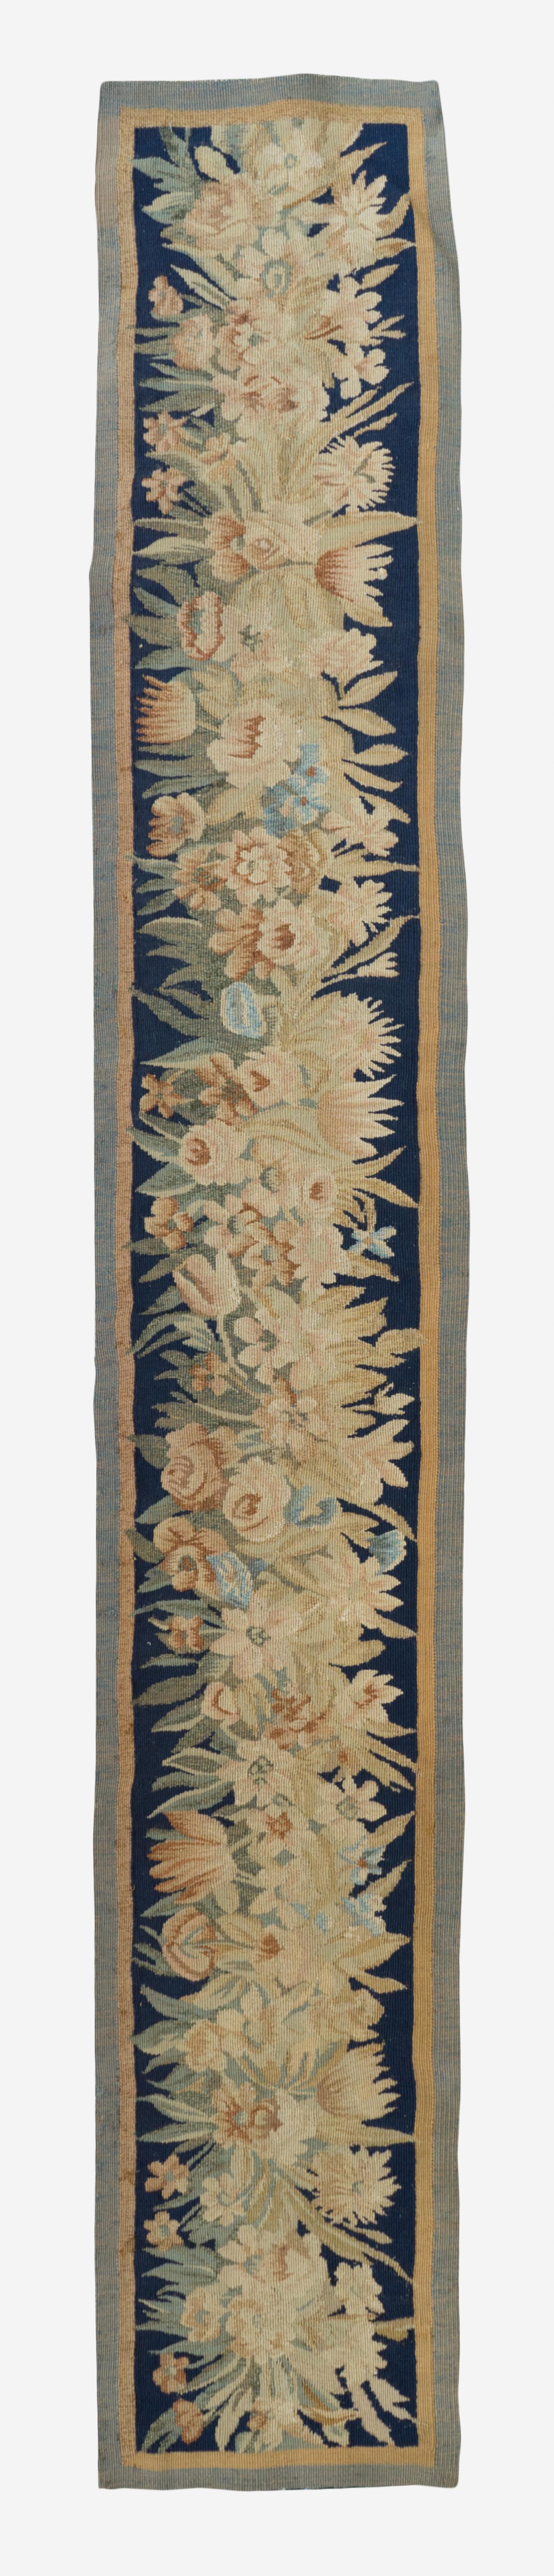 Antique 17th Century Ivory Blue Brown French Aubusson Tapestry Border Panel In Good Condition For Sale In New York, NY